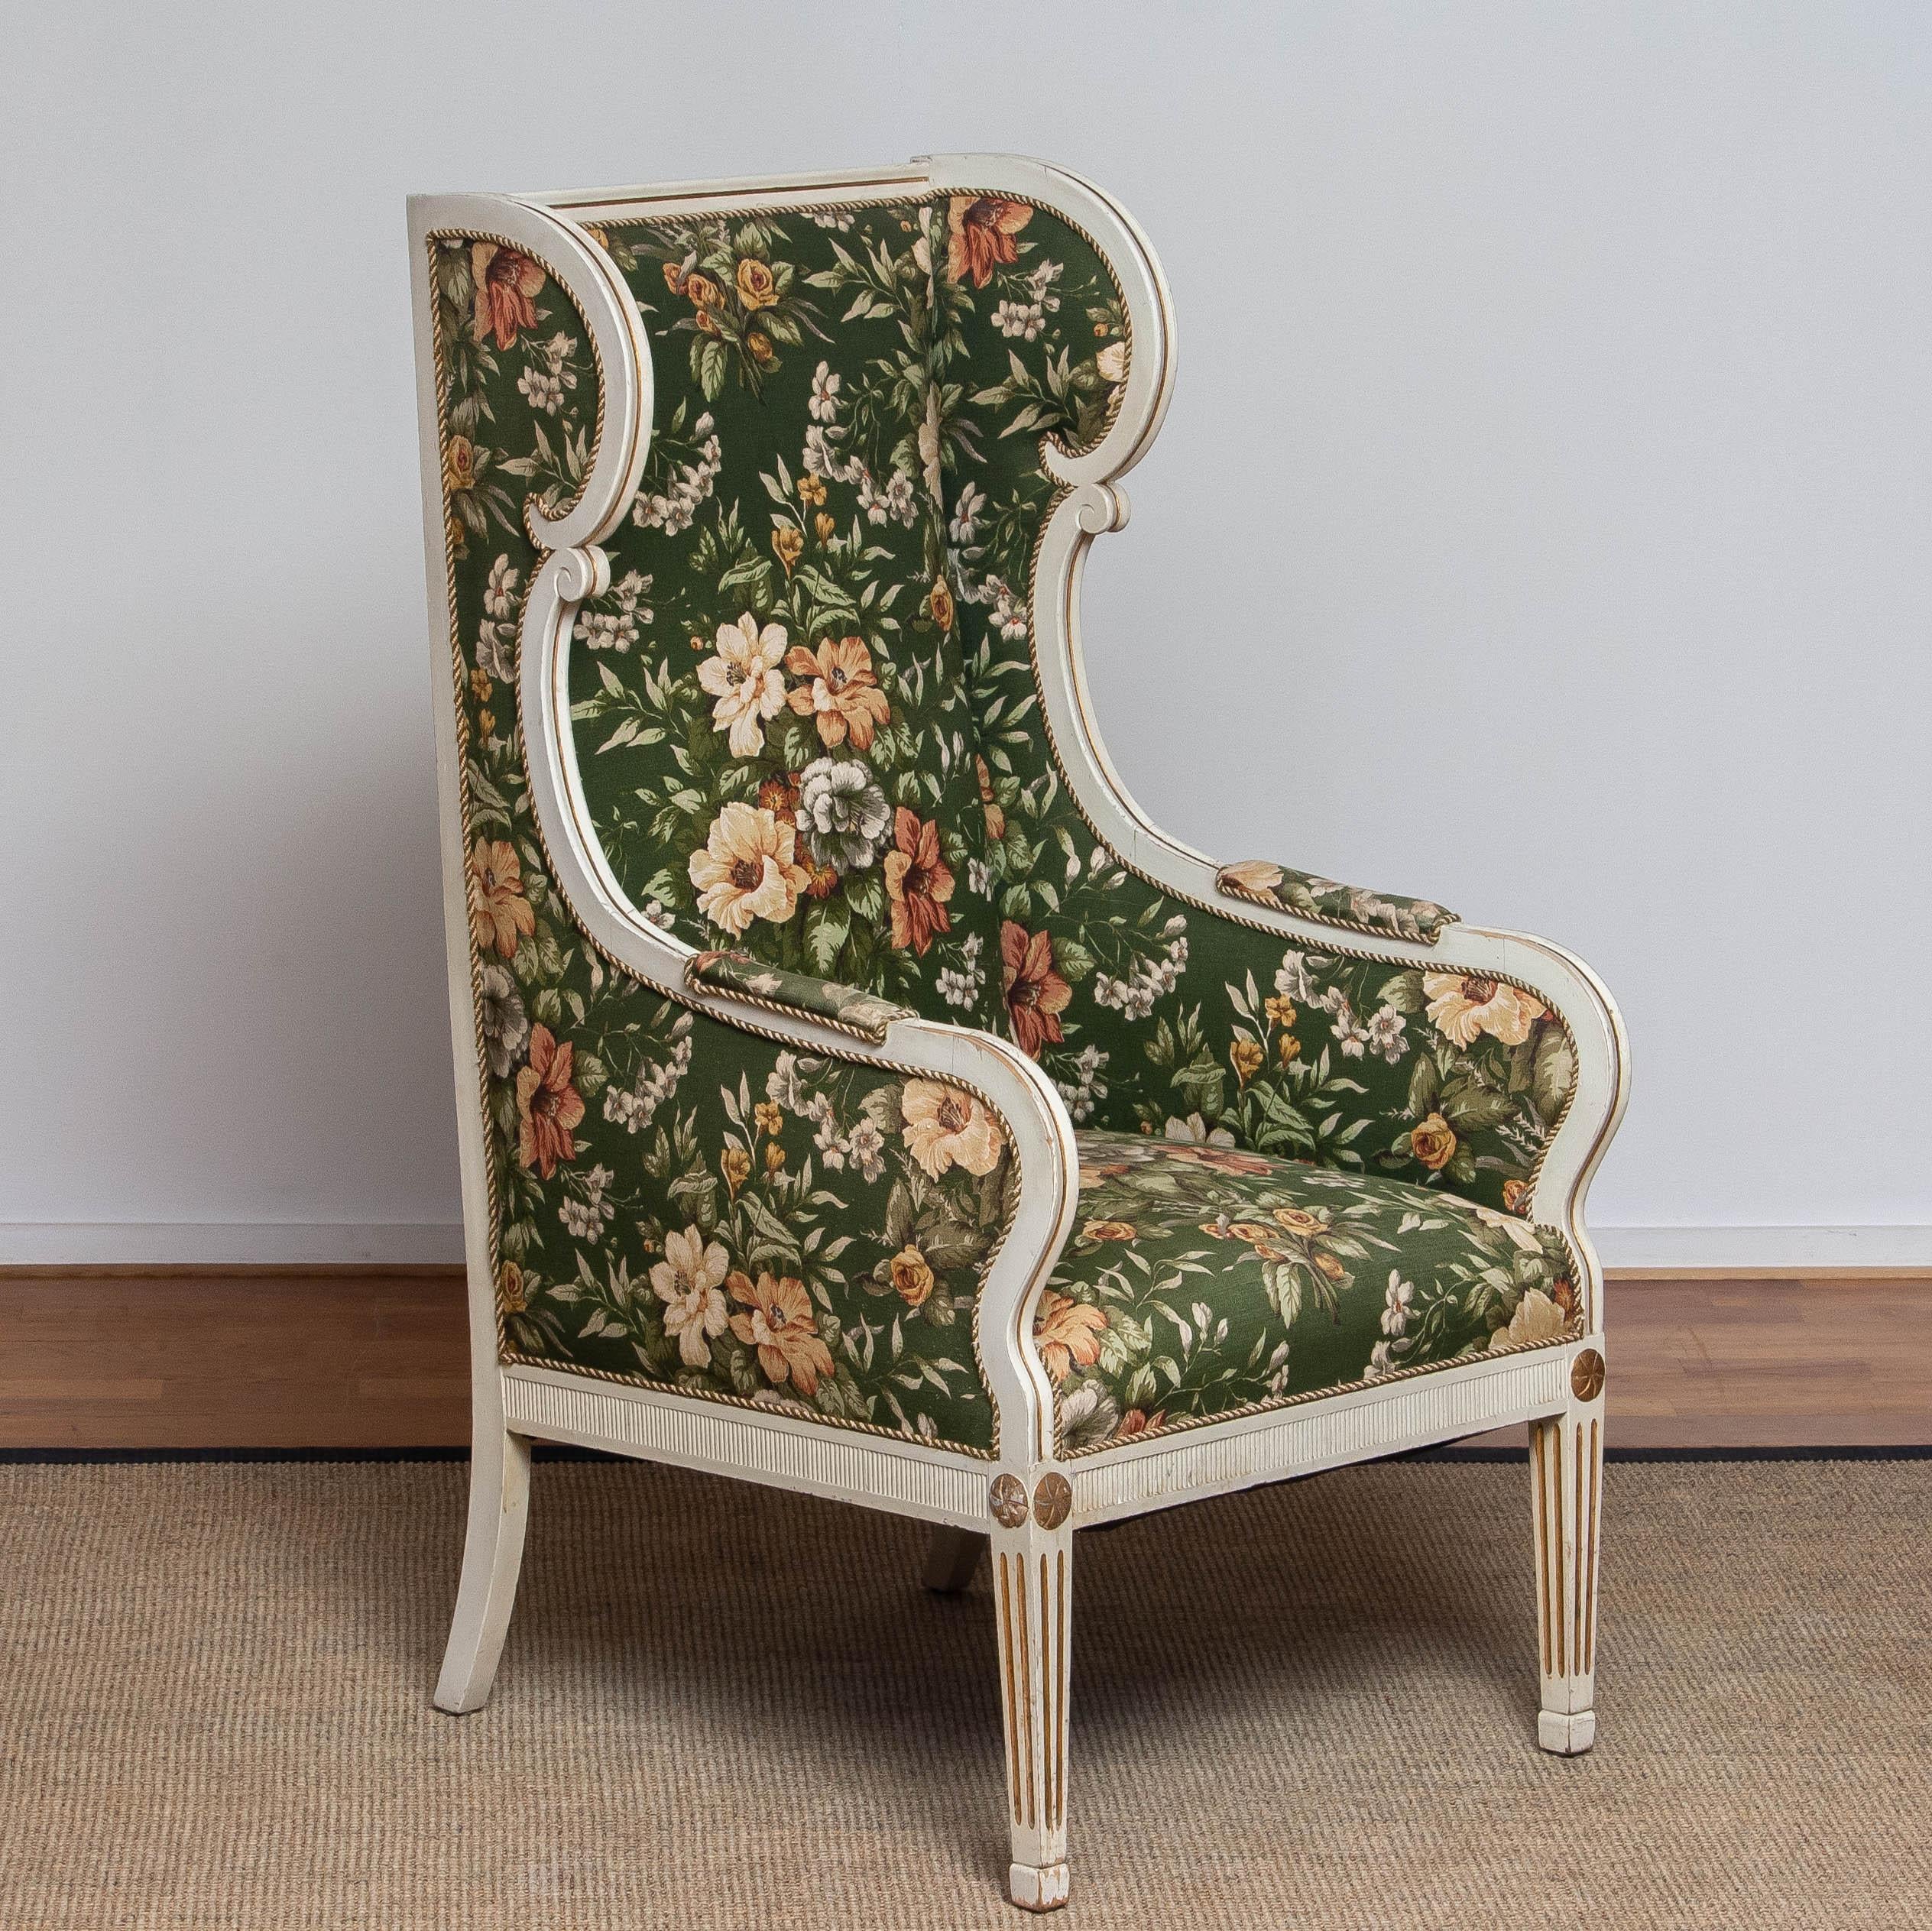 Very rare and beautiful half 19th century white, with golden accents, Gustavian / Swedish model wingback lounge chair made by One Christian Petersen in Copenhagen. This tall chair is upholstered with a beautiful, printed, flower motive on linnen